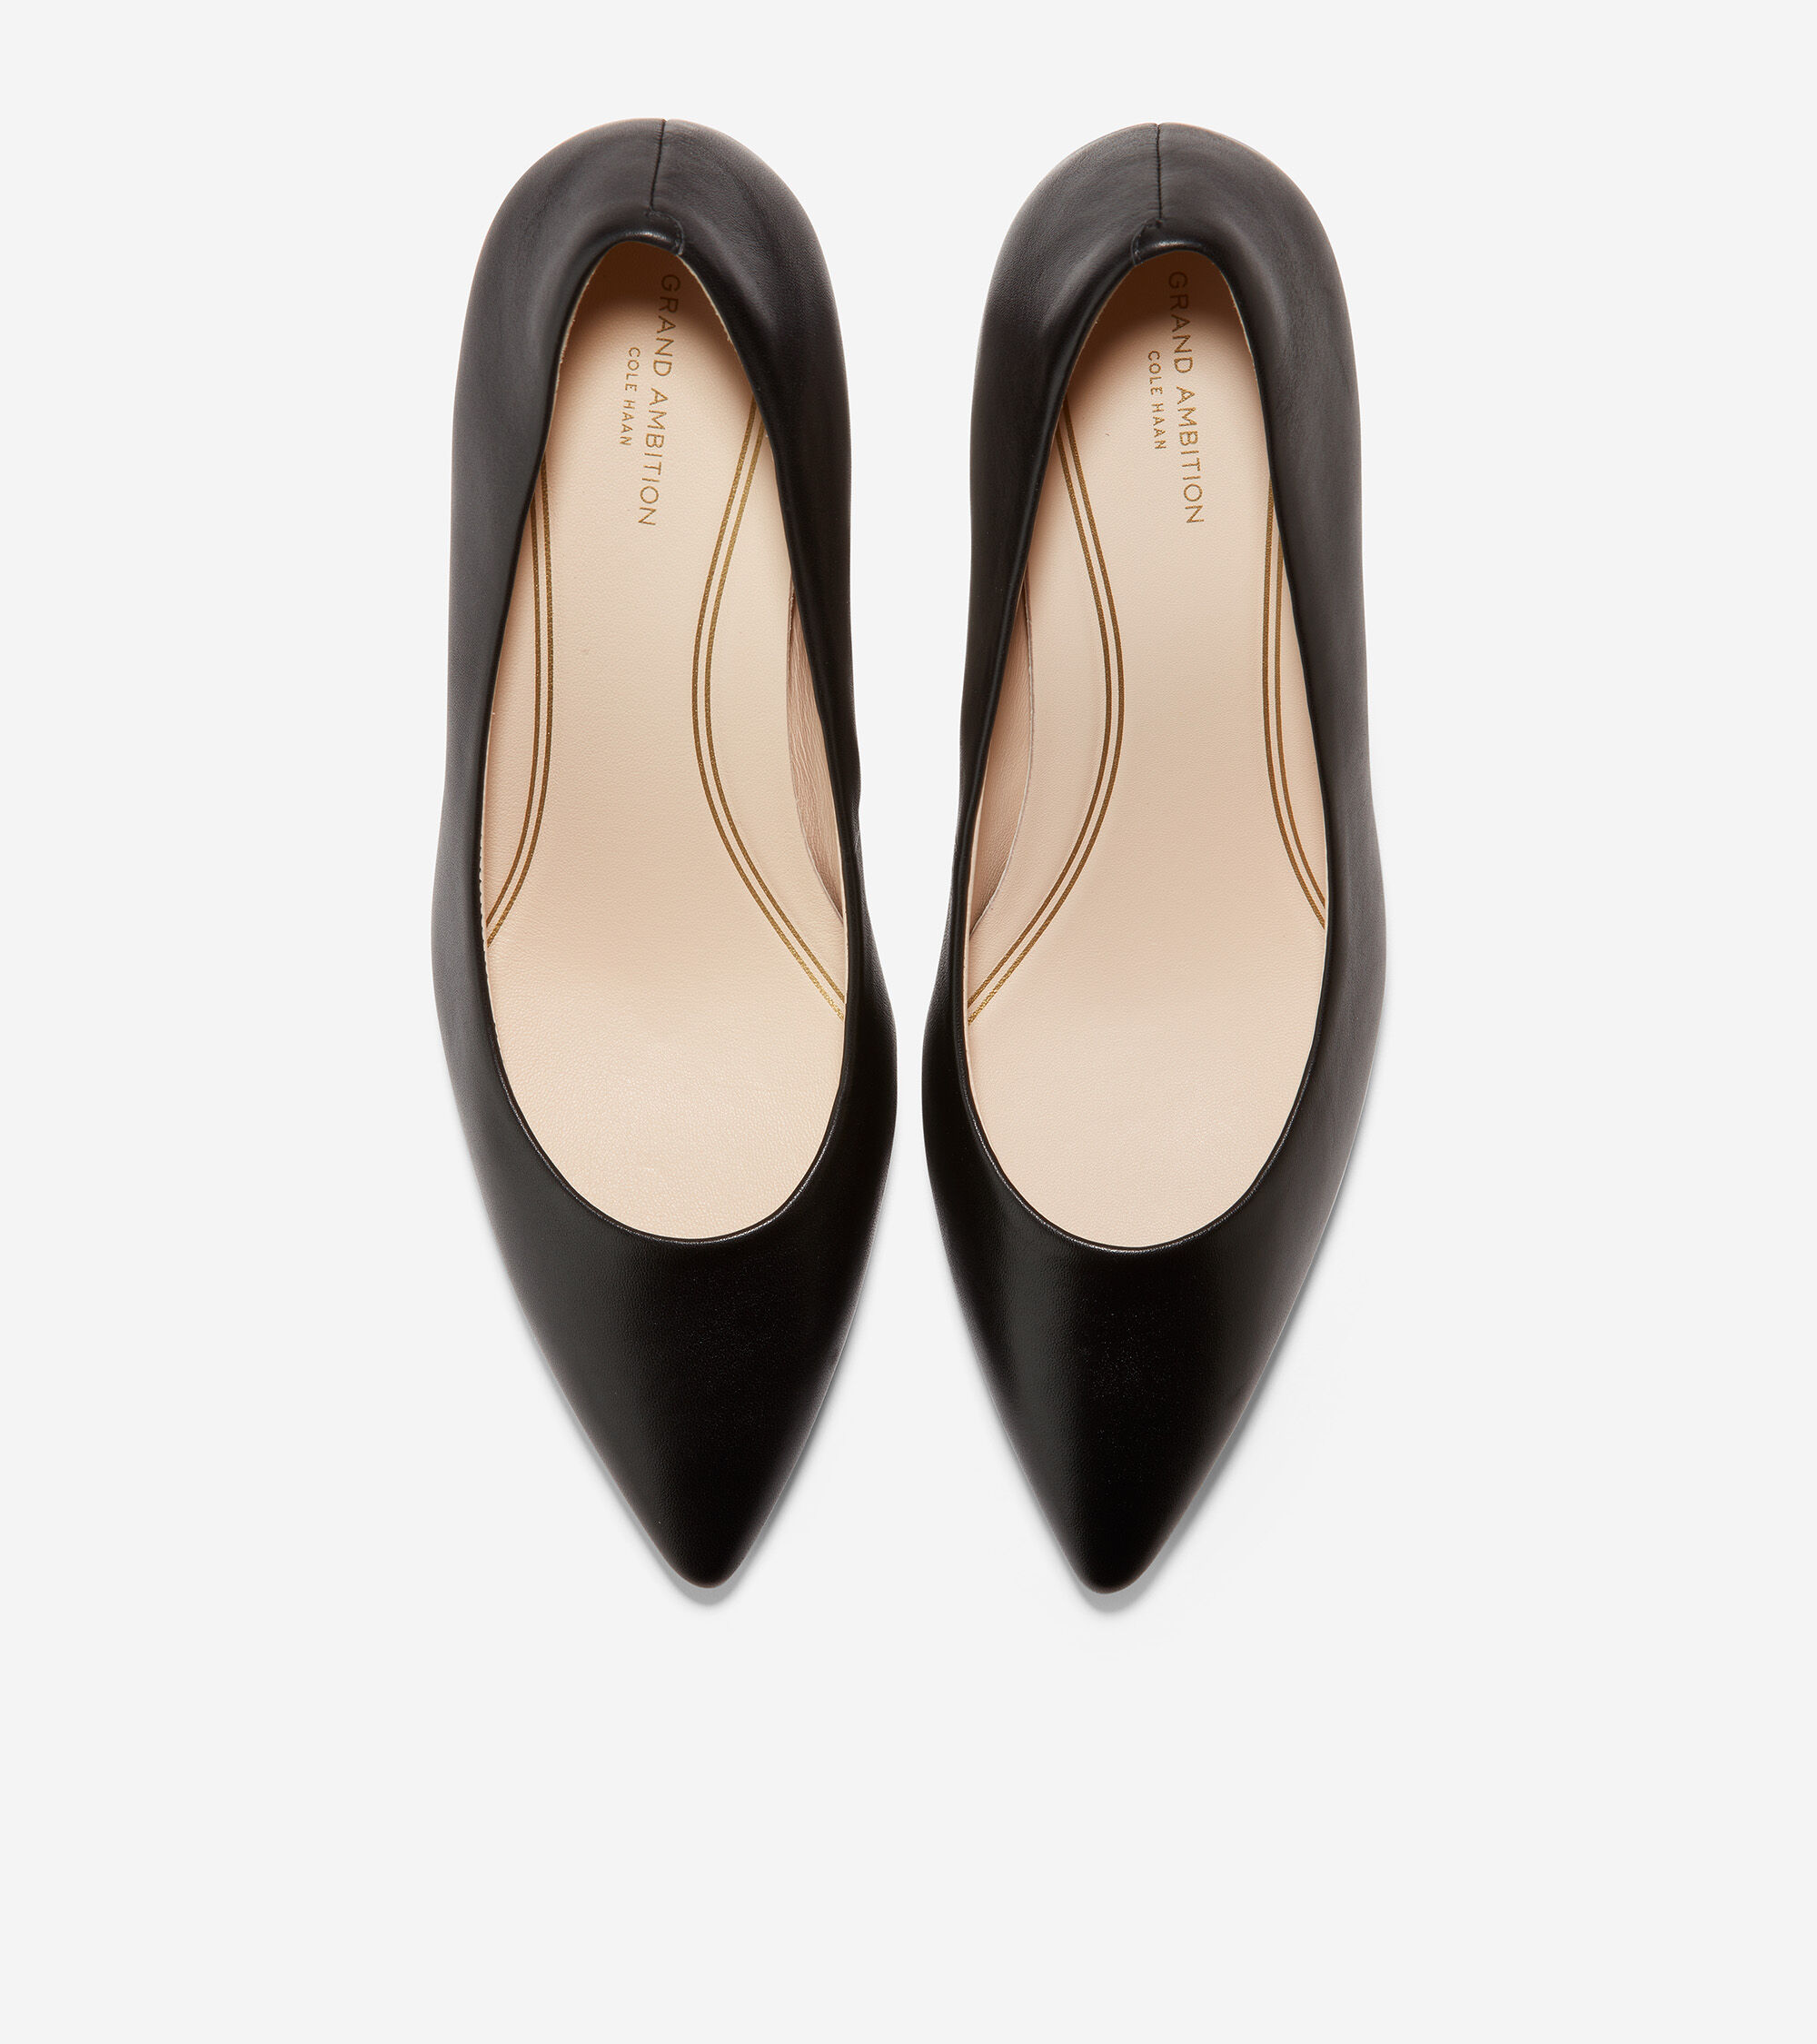 Women's Grand Ambition Pump in Black Leather | Cole Haan